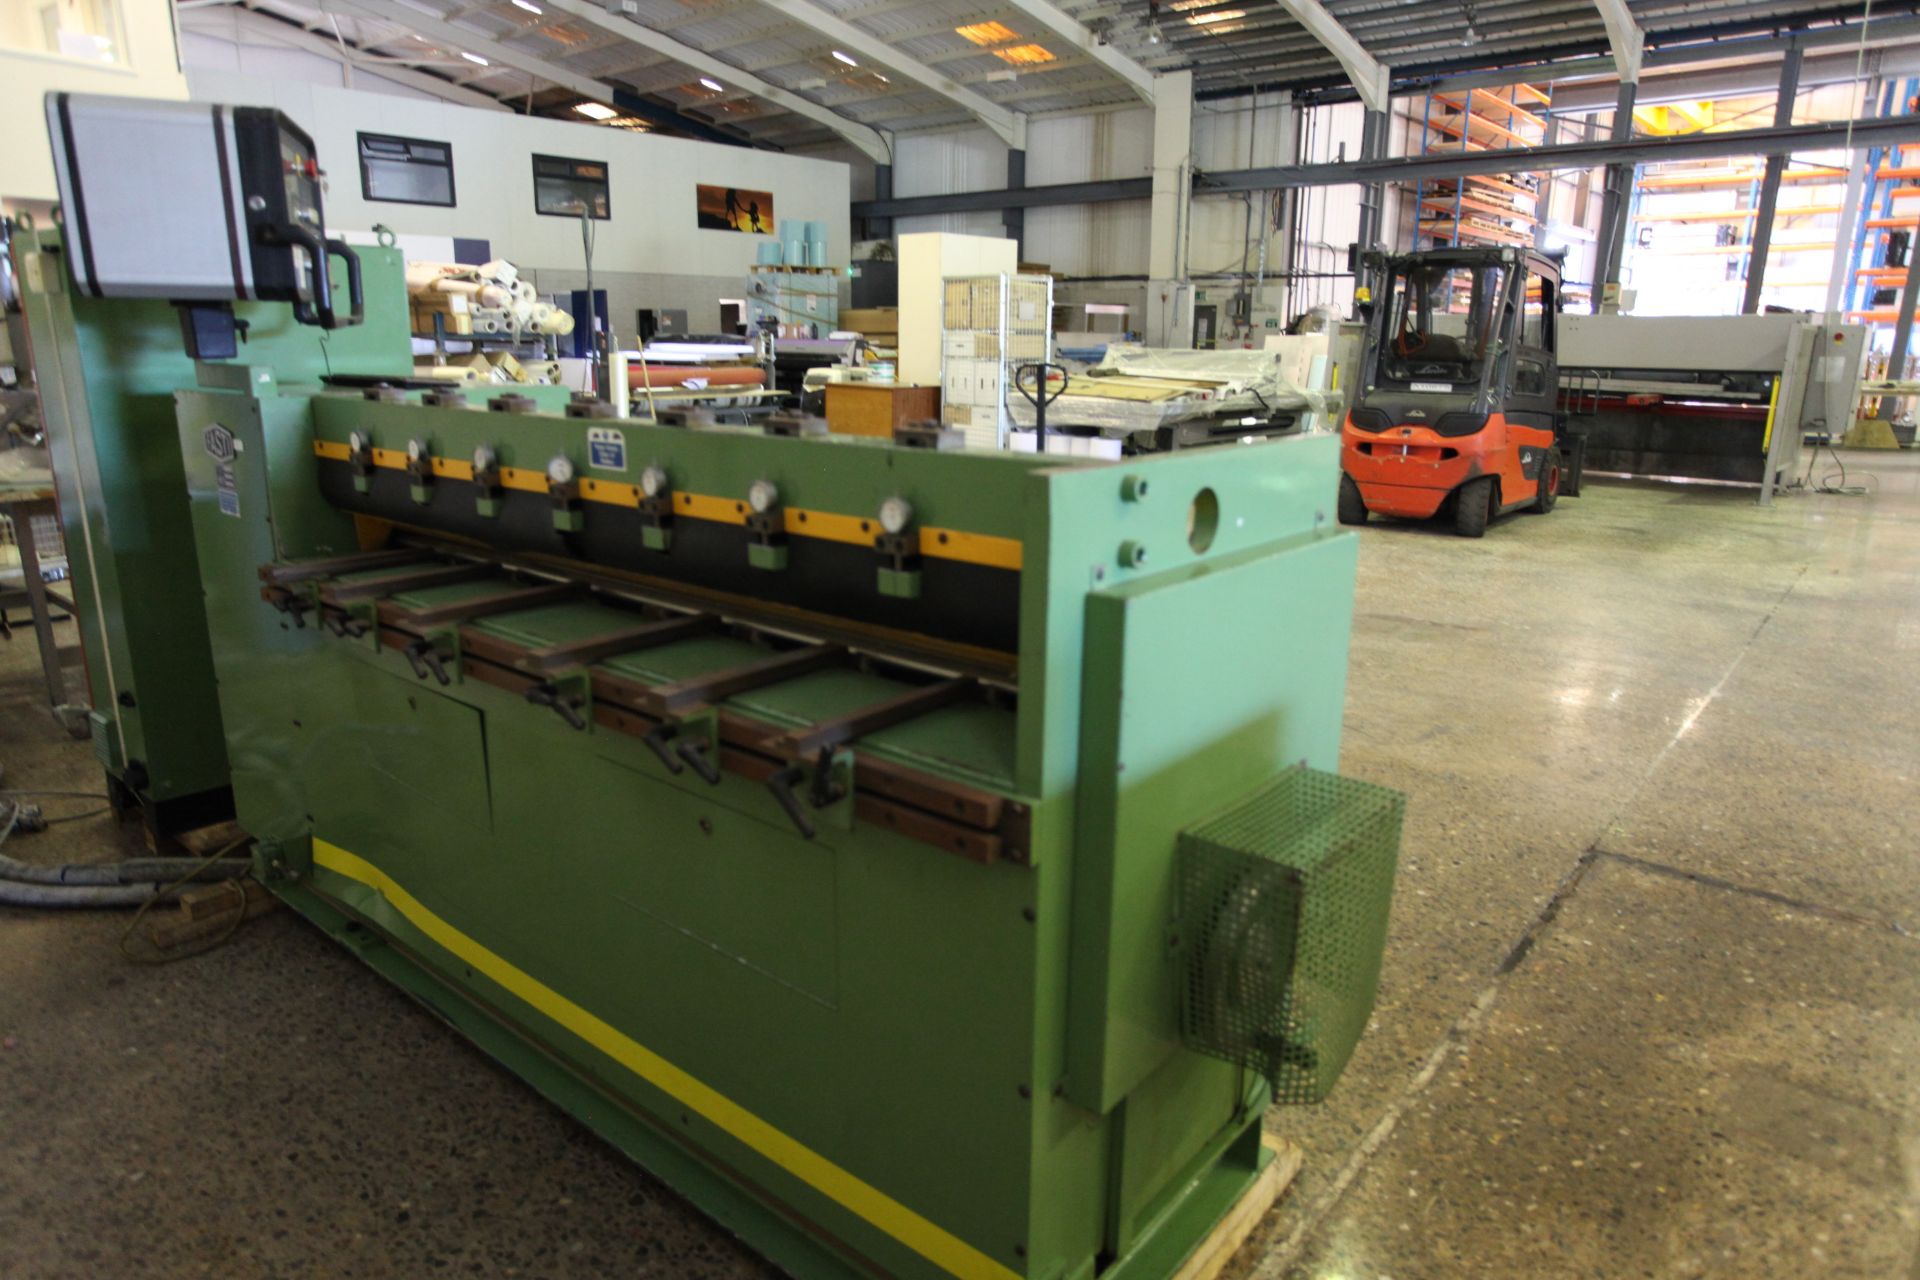 Fasti 1044-18-0.75 Reflector Bending Machine, serial no. 94144 002, dimensions approx. 280cm wide - Image 3 of 10